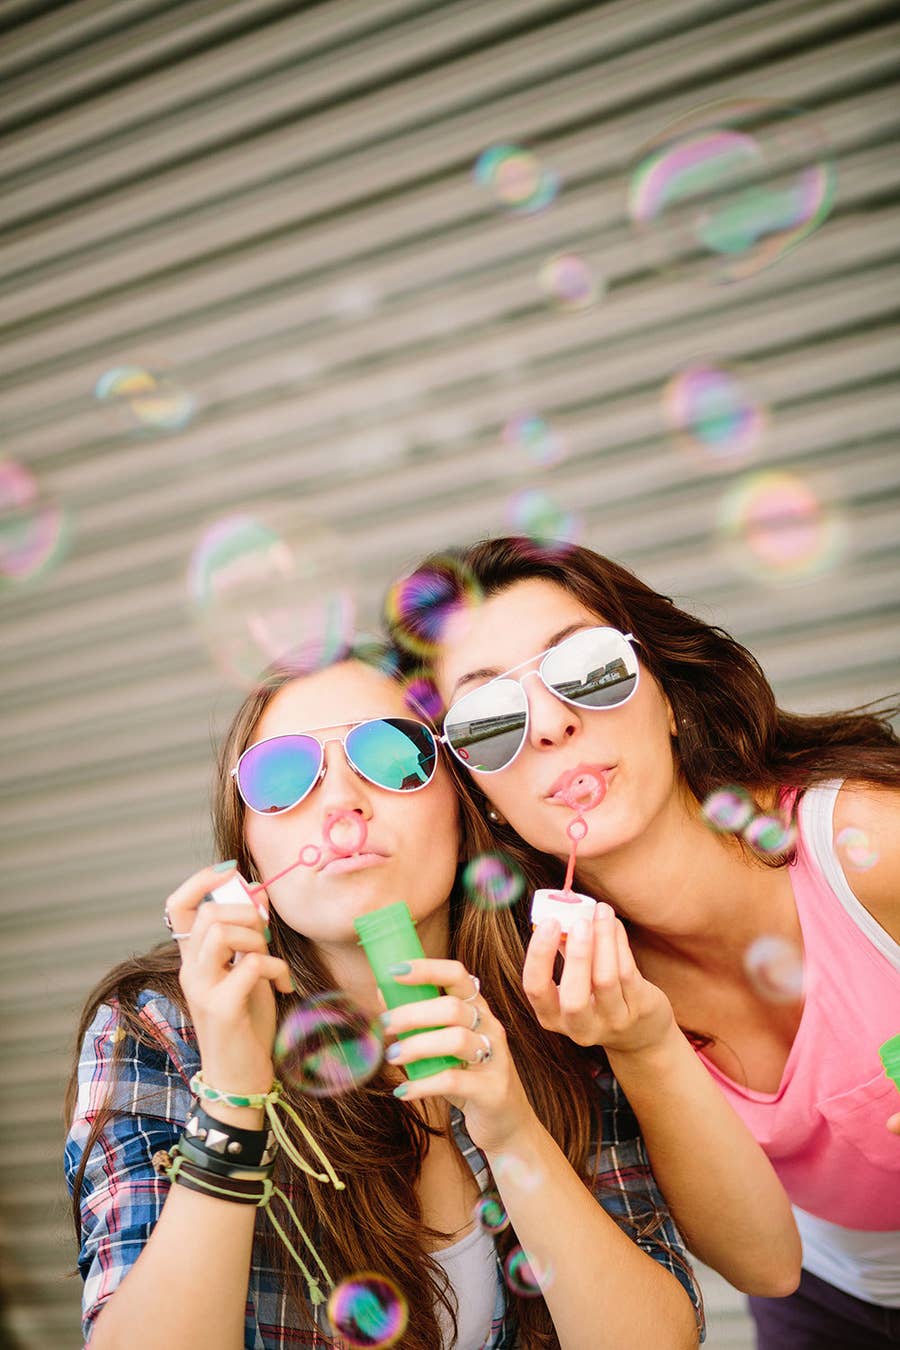 37 Impossibly Fun Best Friend Photography Ideas